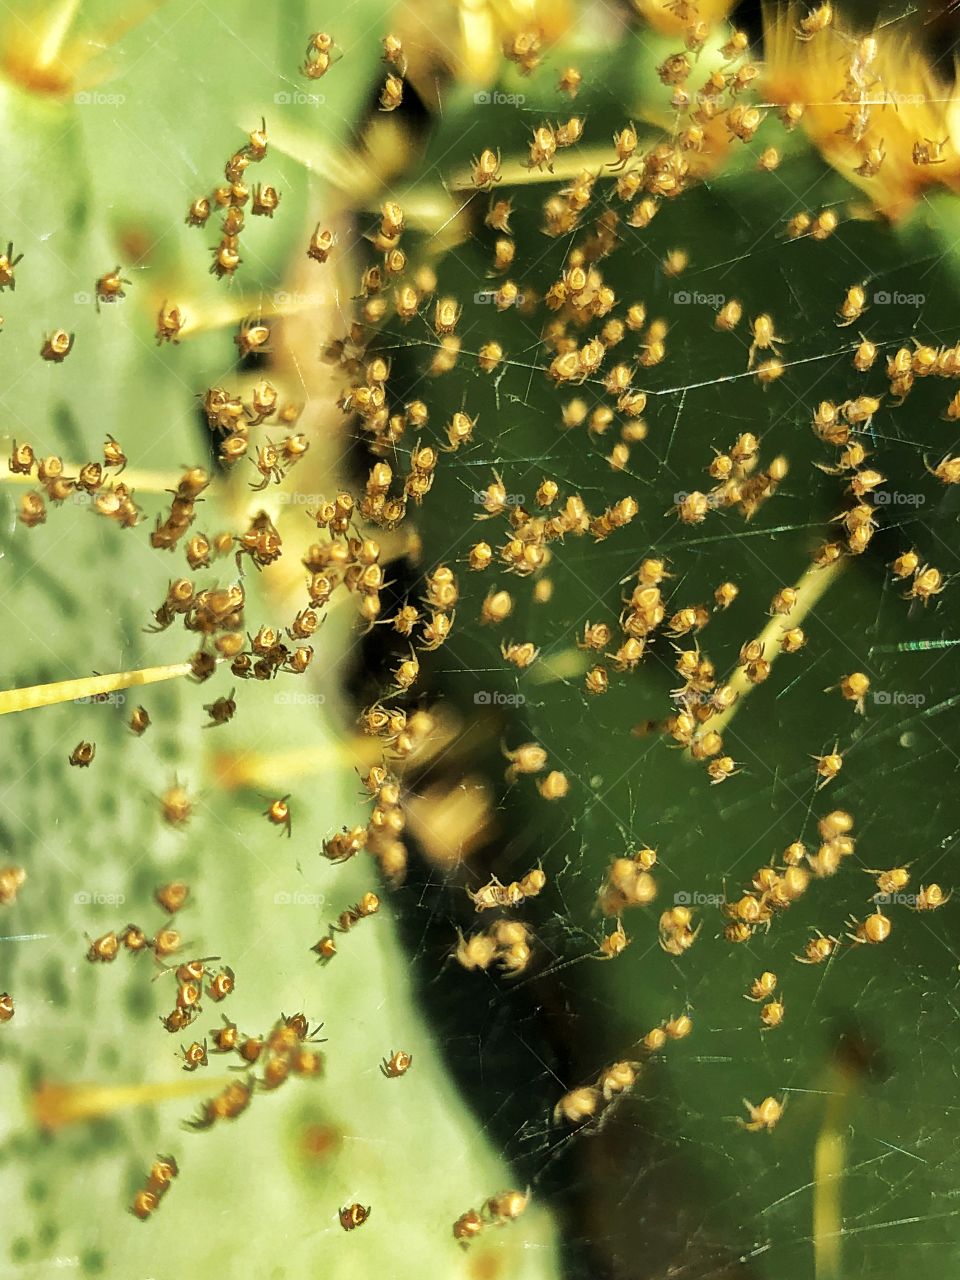 Baby spiders with cactus in background 